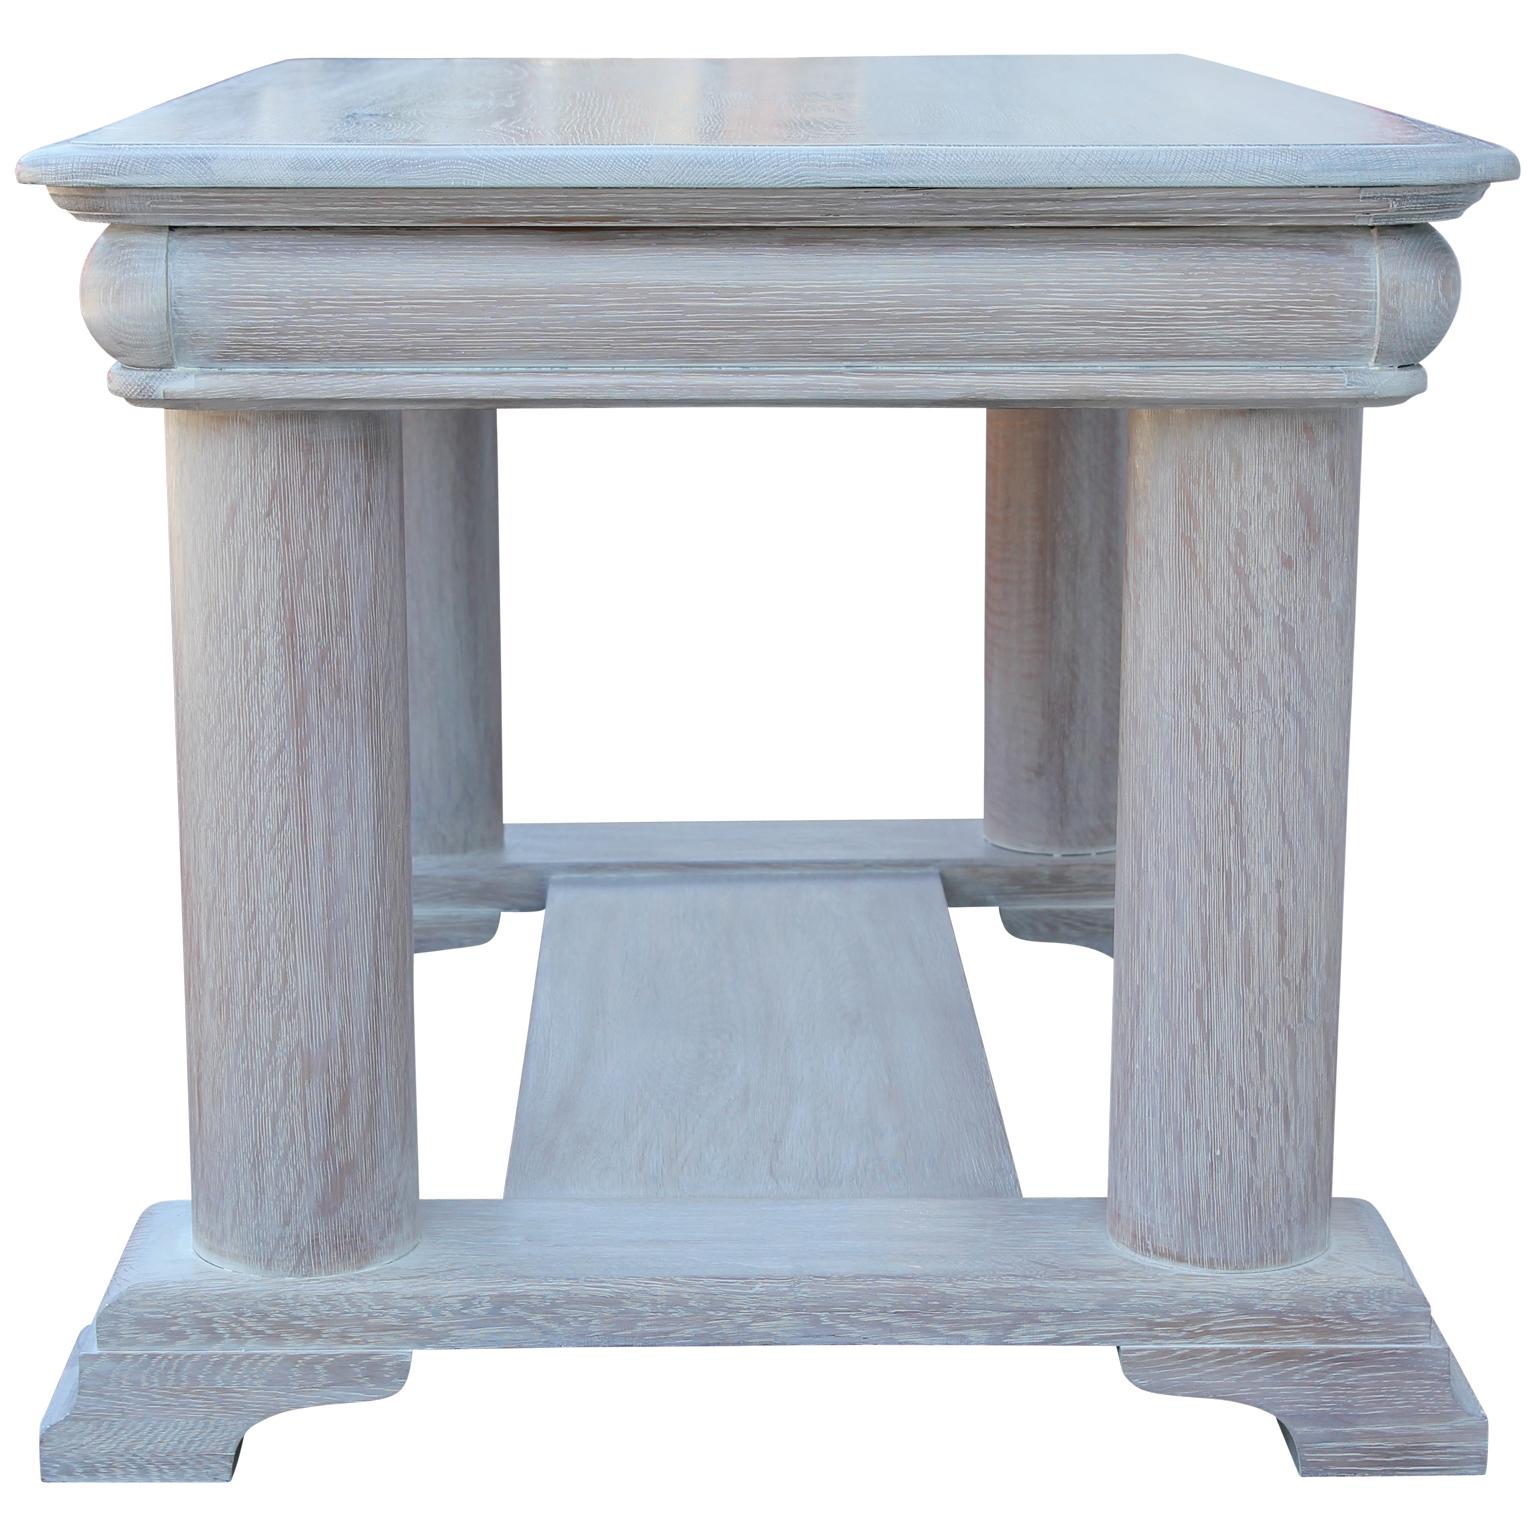 Custom finished modern natural cerused Arts & Crafts column desk
- Arts & Crafts movement
- Made out of tiger oak
- Beautifully finished in a white wash with cerused grain.
- circa 1910
- Modern column design
- Finished back
- Could be used